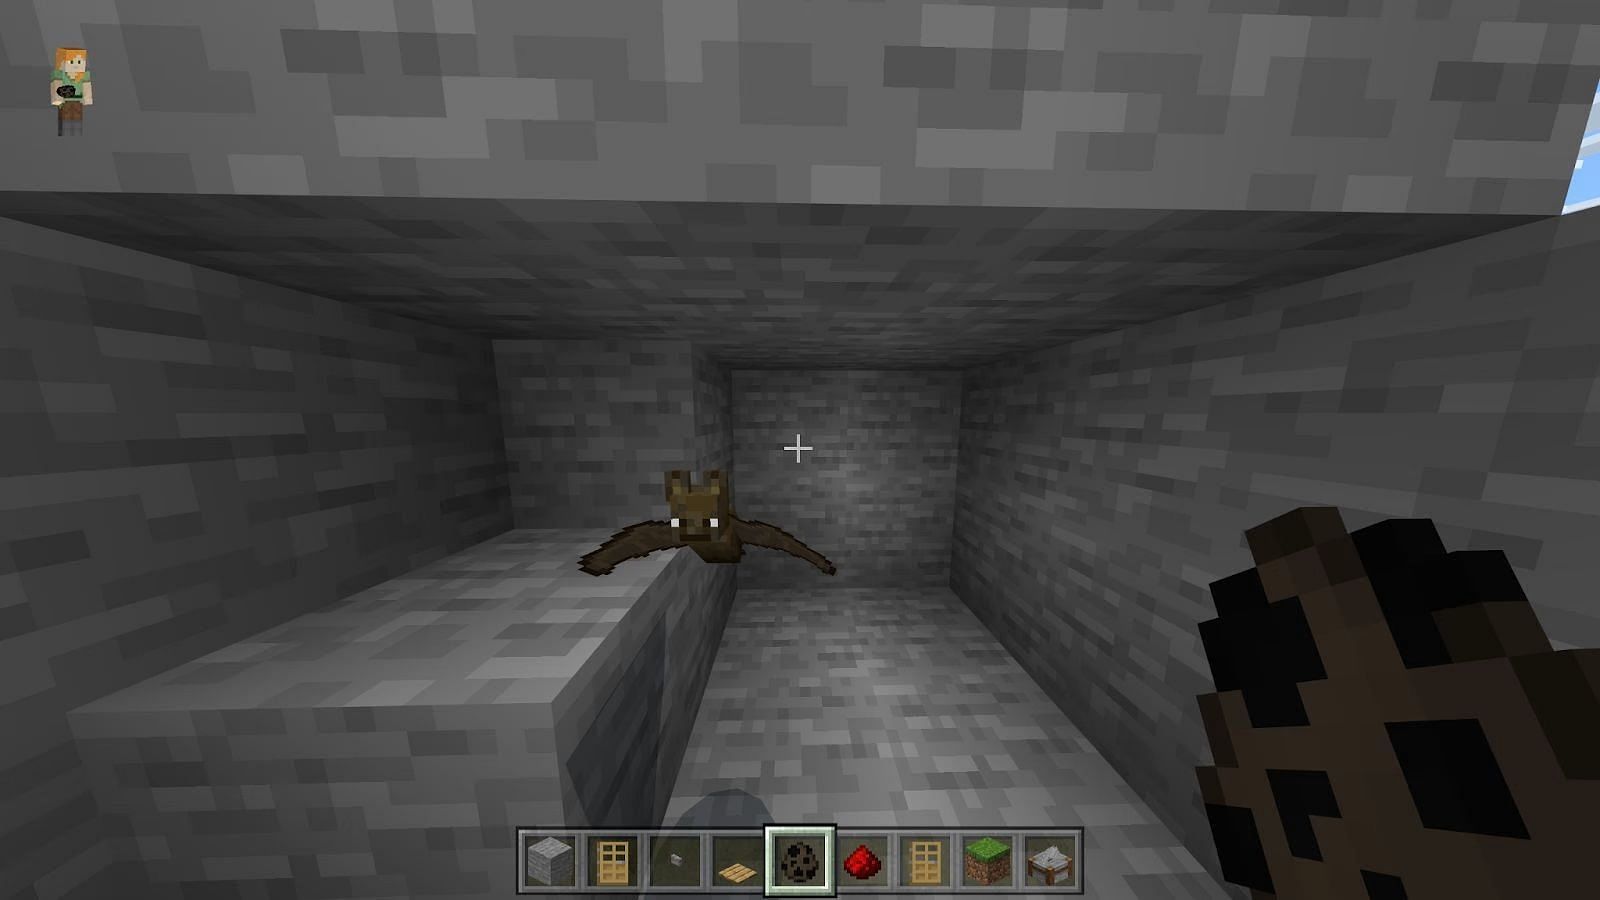 Bats mainly spawn in dark areas and serve no purpose other than enhancing the ambiance of the world (Image via Mojang)